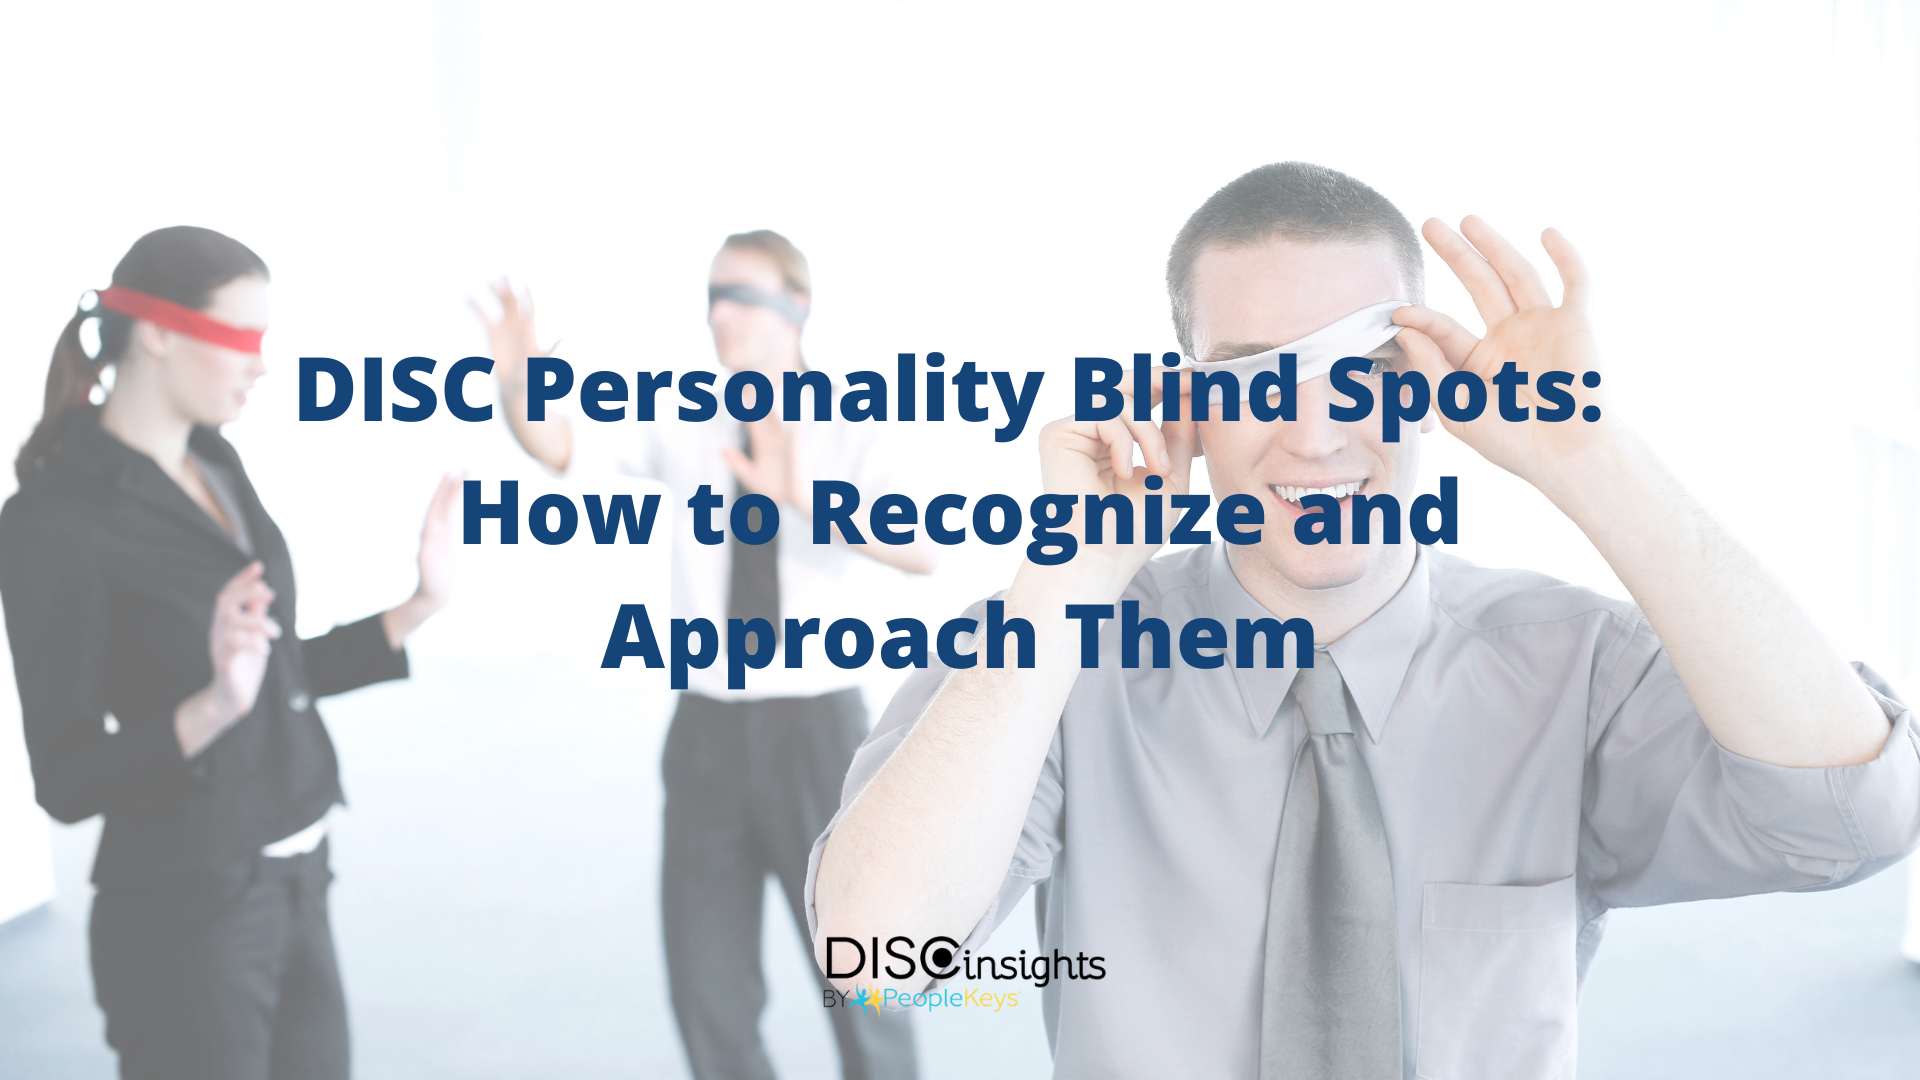 DISC Personality Blind Spots